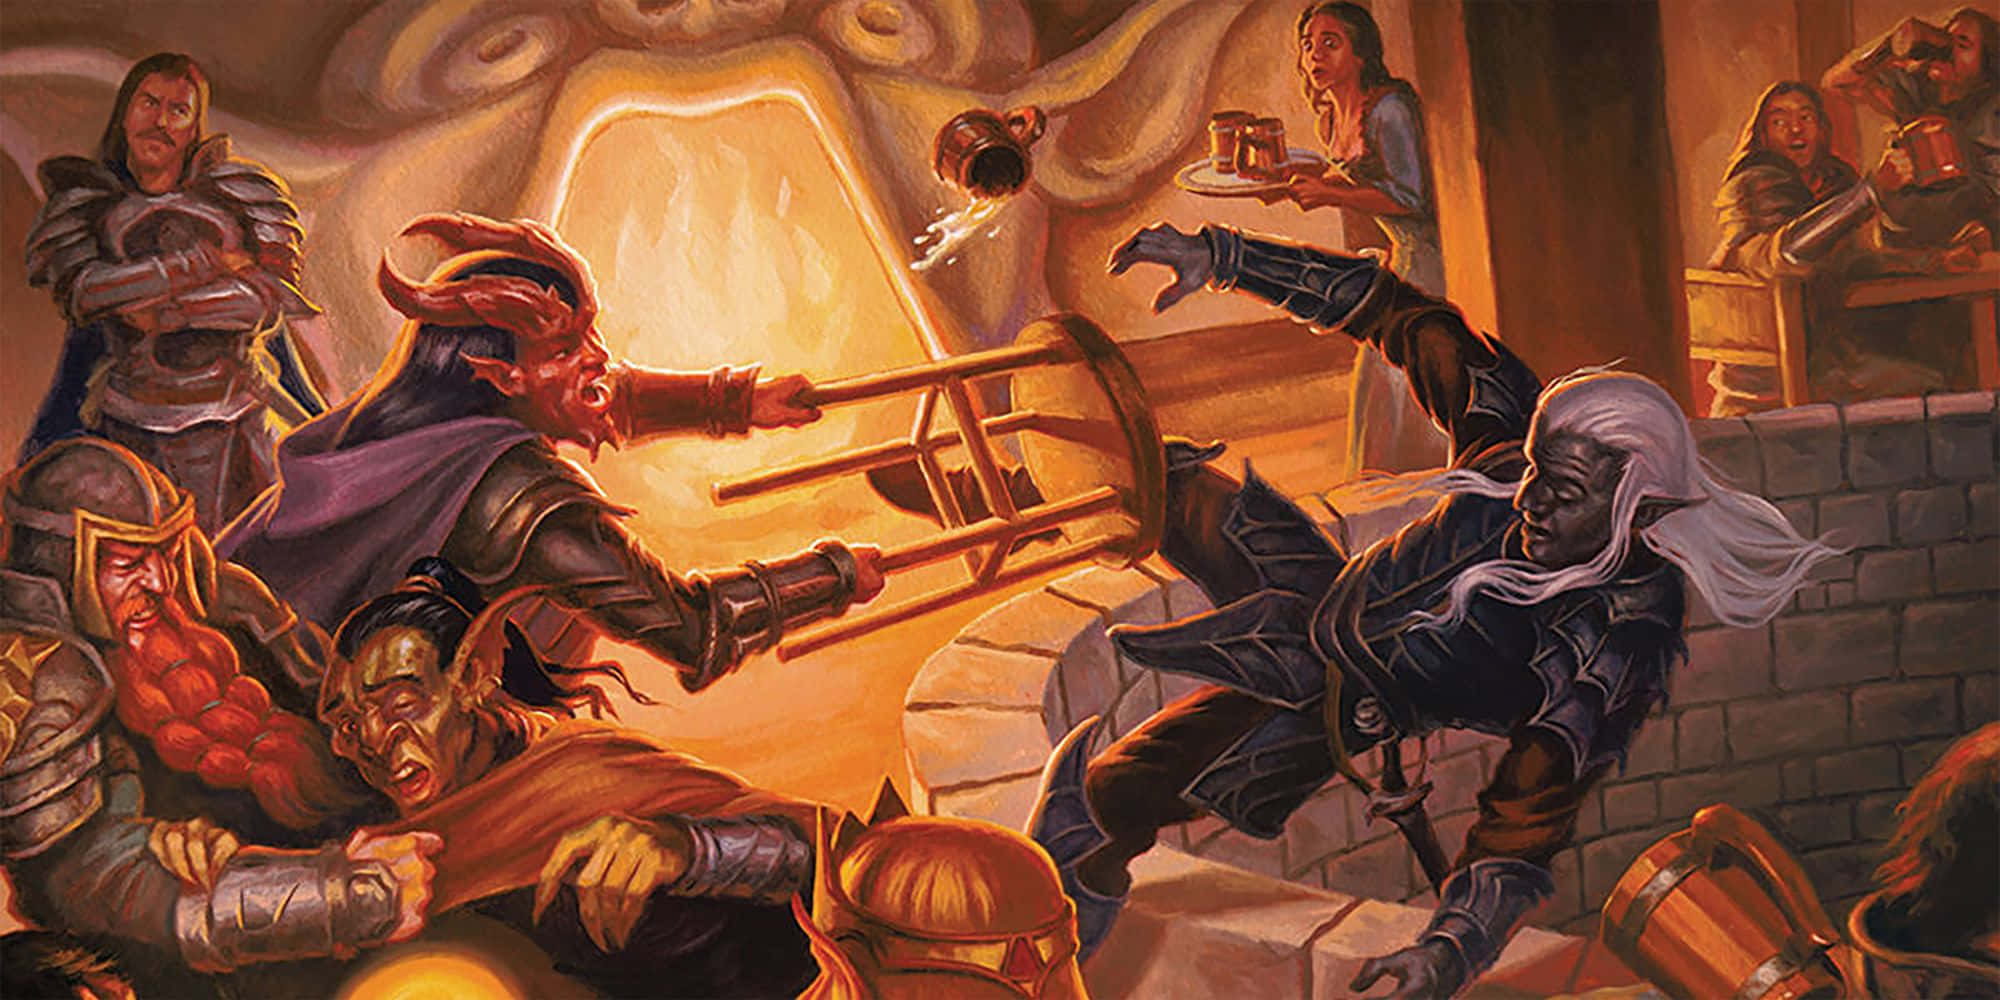 Enter the world of Dungeons&Dragons